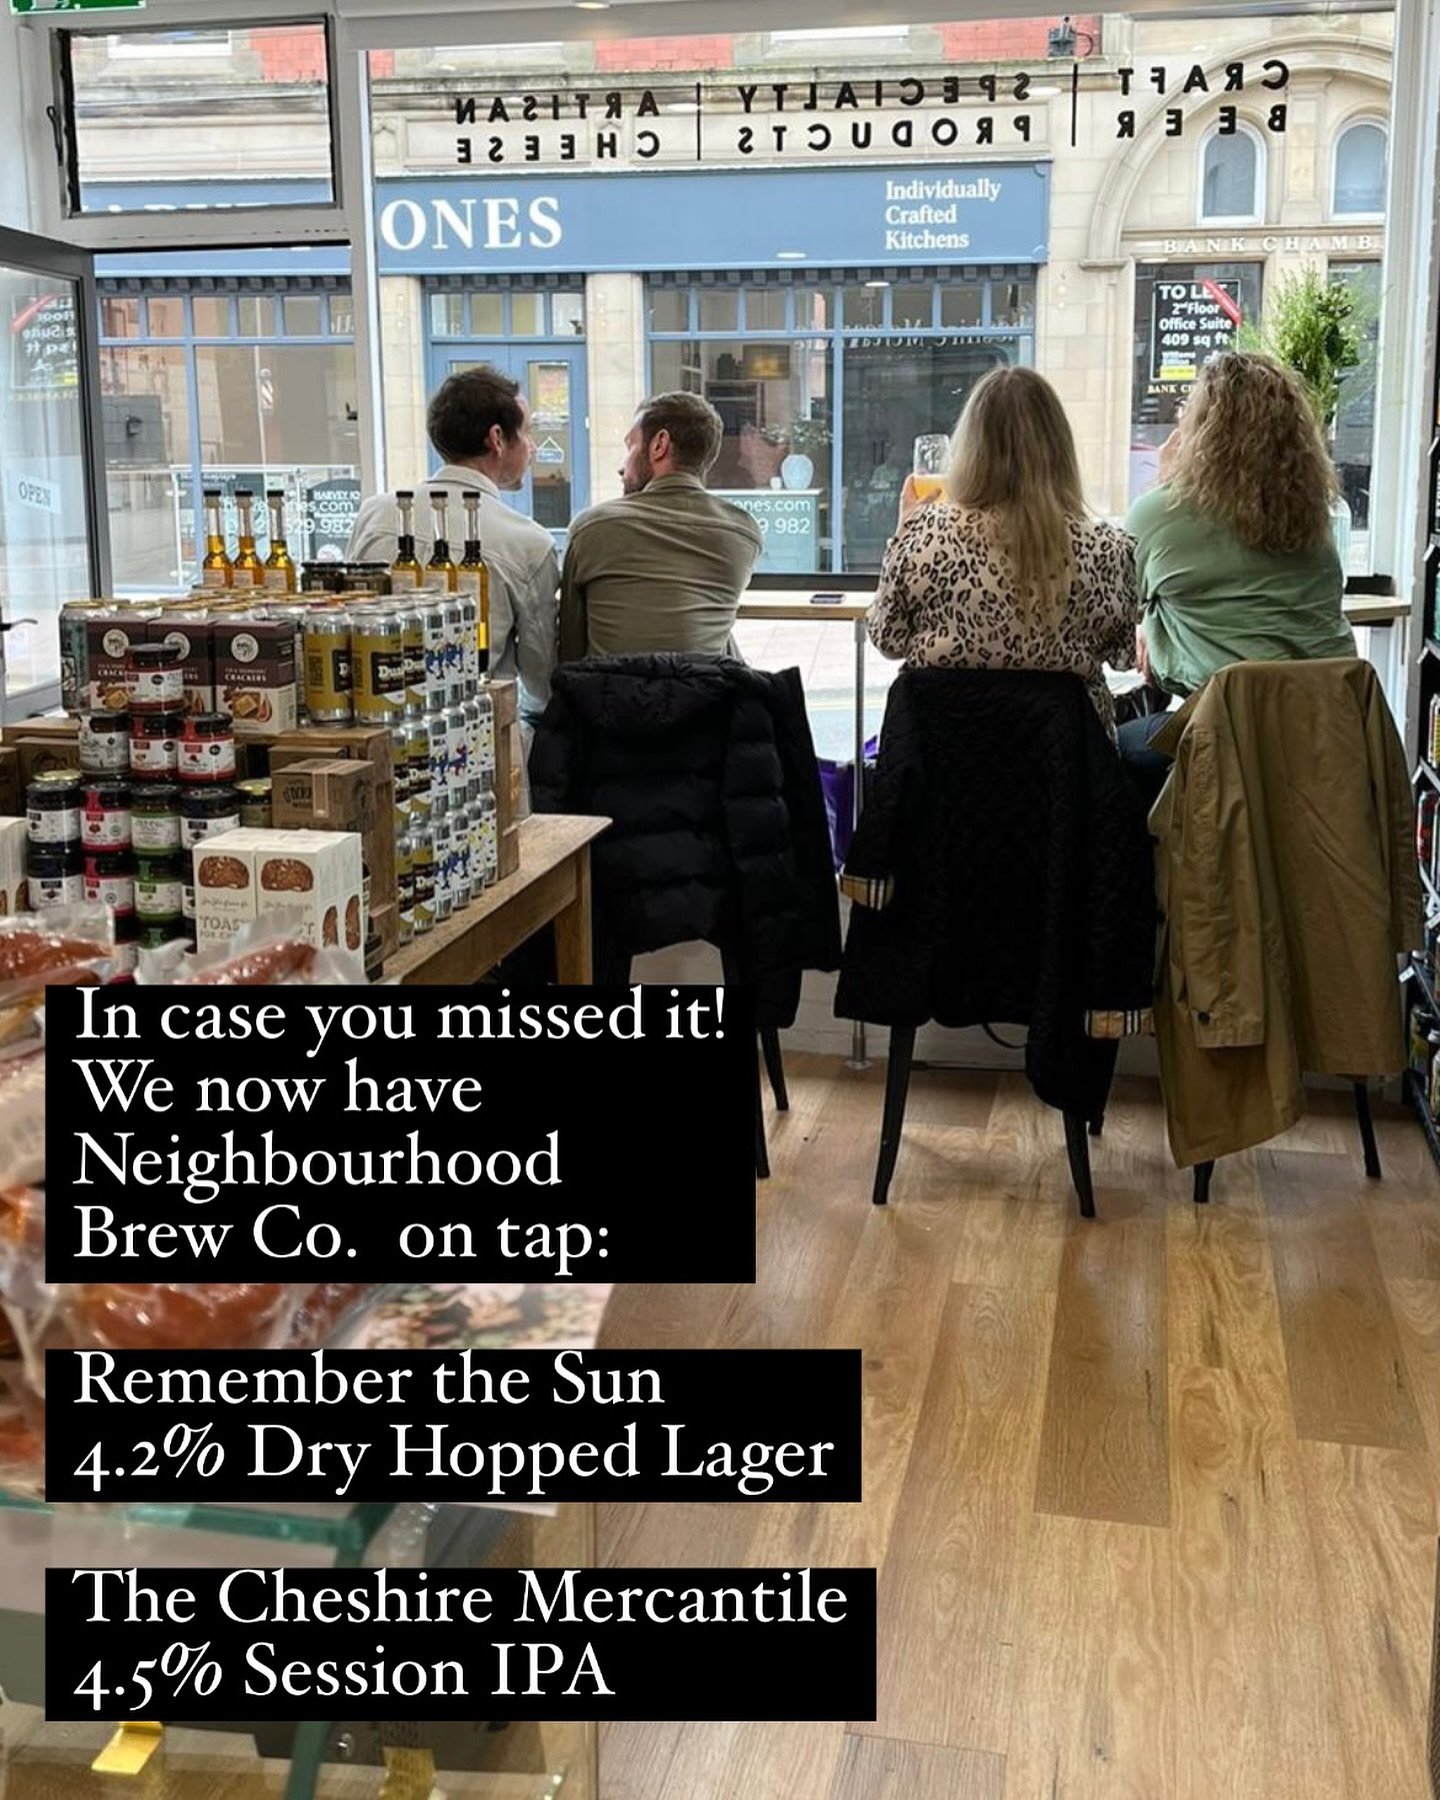 We&rsquo;ve got the Friday Feeling, don&rsquo;t know about you. In case you missed the news last week, we now have @neighbourhoodbc on tap and a snazzy new counter for you to sit in and enjoy it here! 

Fun fact about our new counter, we found the wo